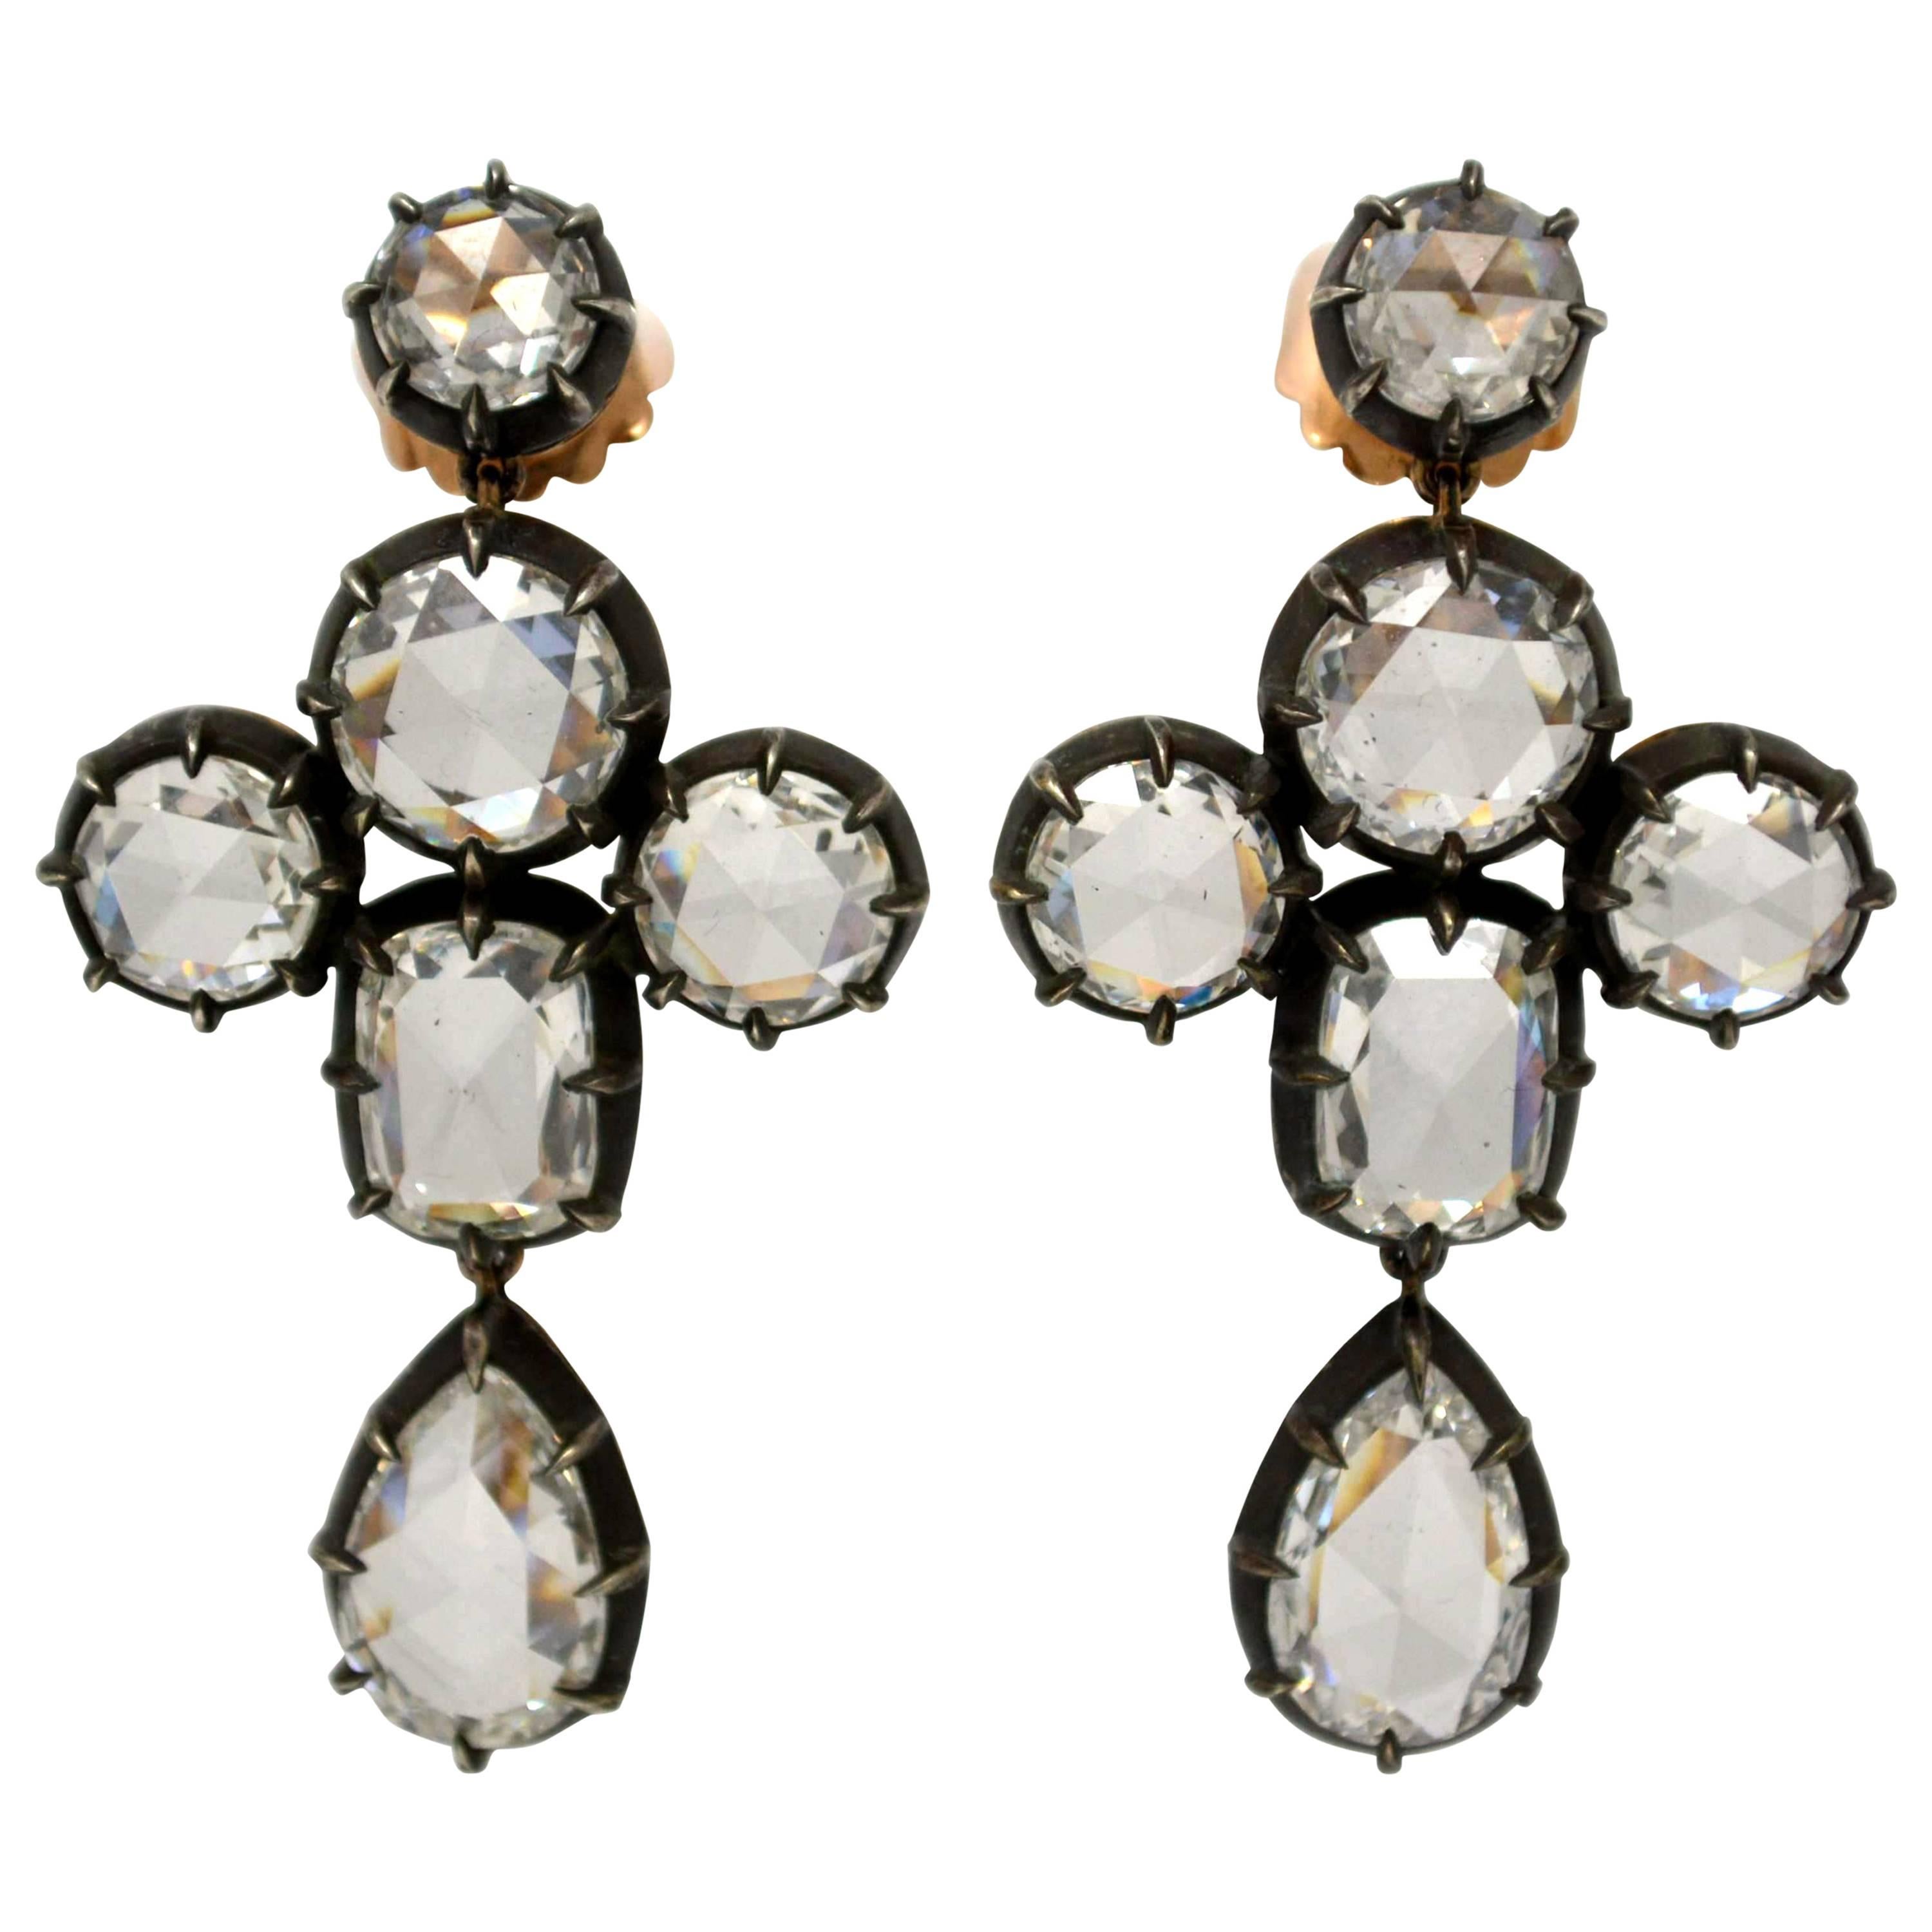 GIA Certified 19.42 Carat Total Weight Antique Style Rosecut Diamond  Earrings.